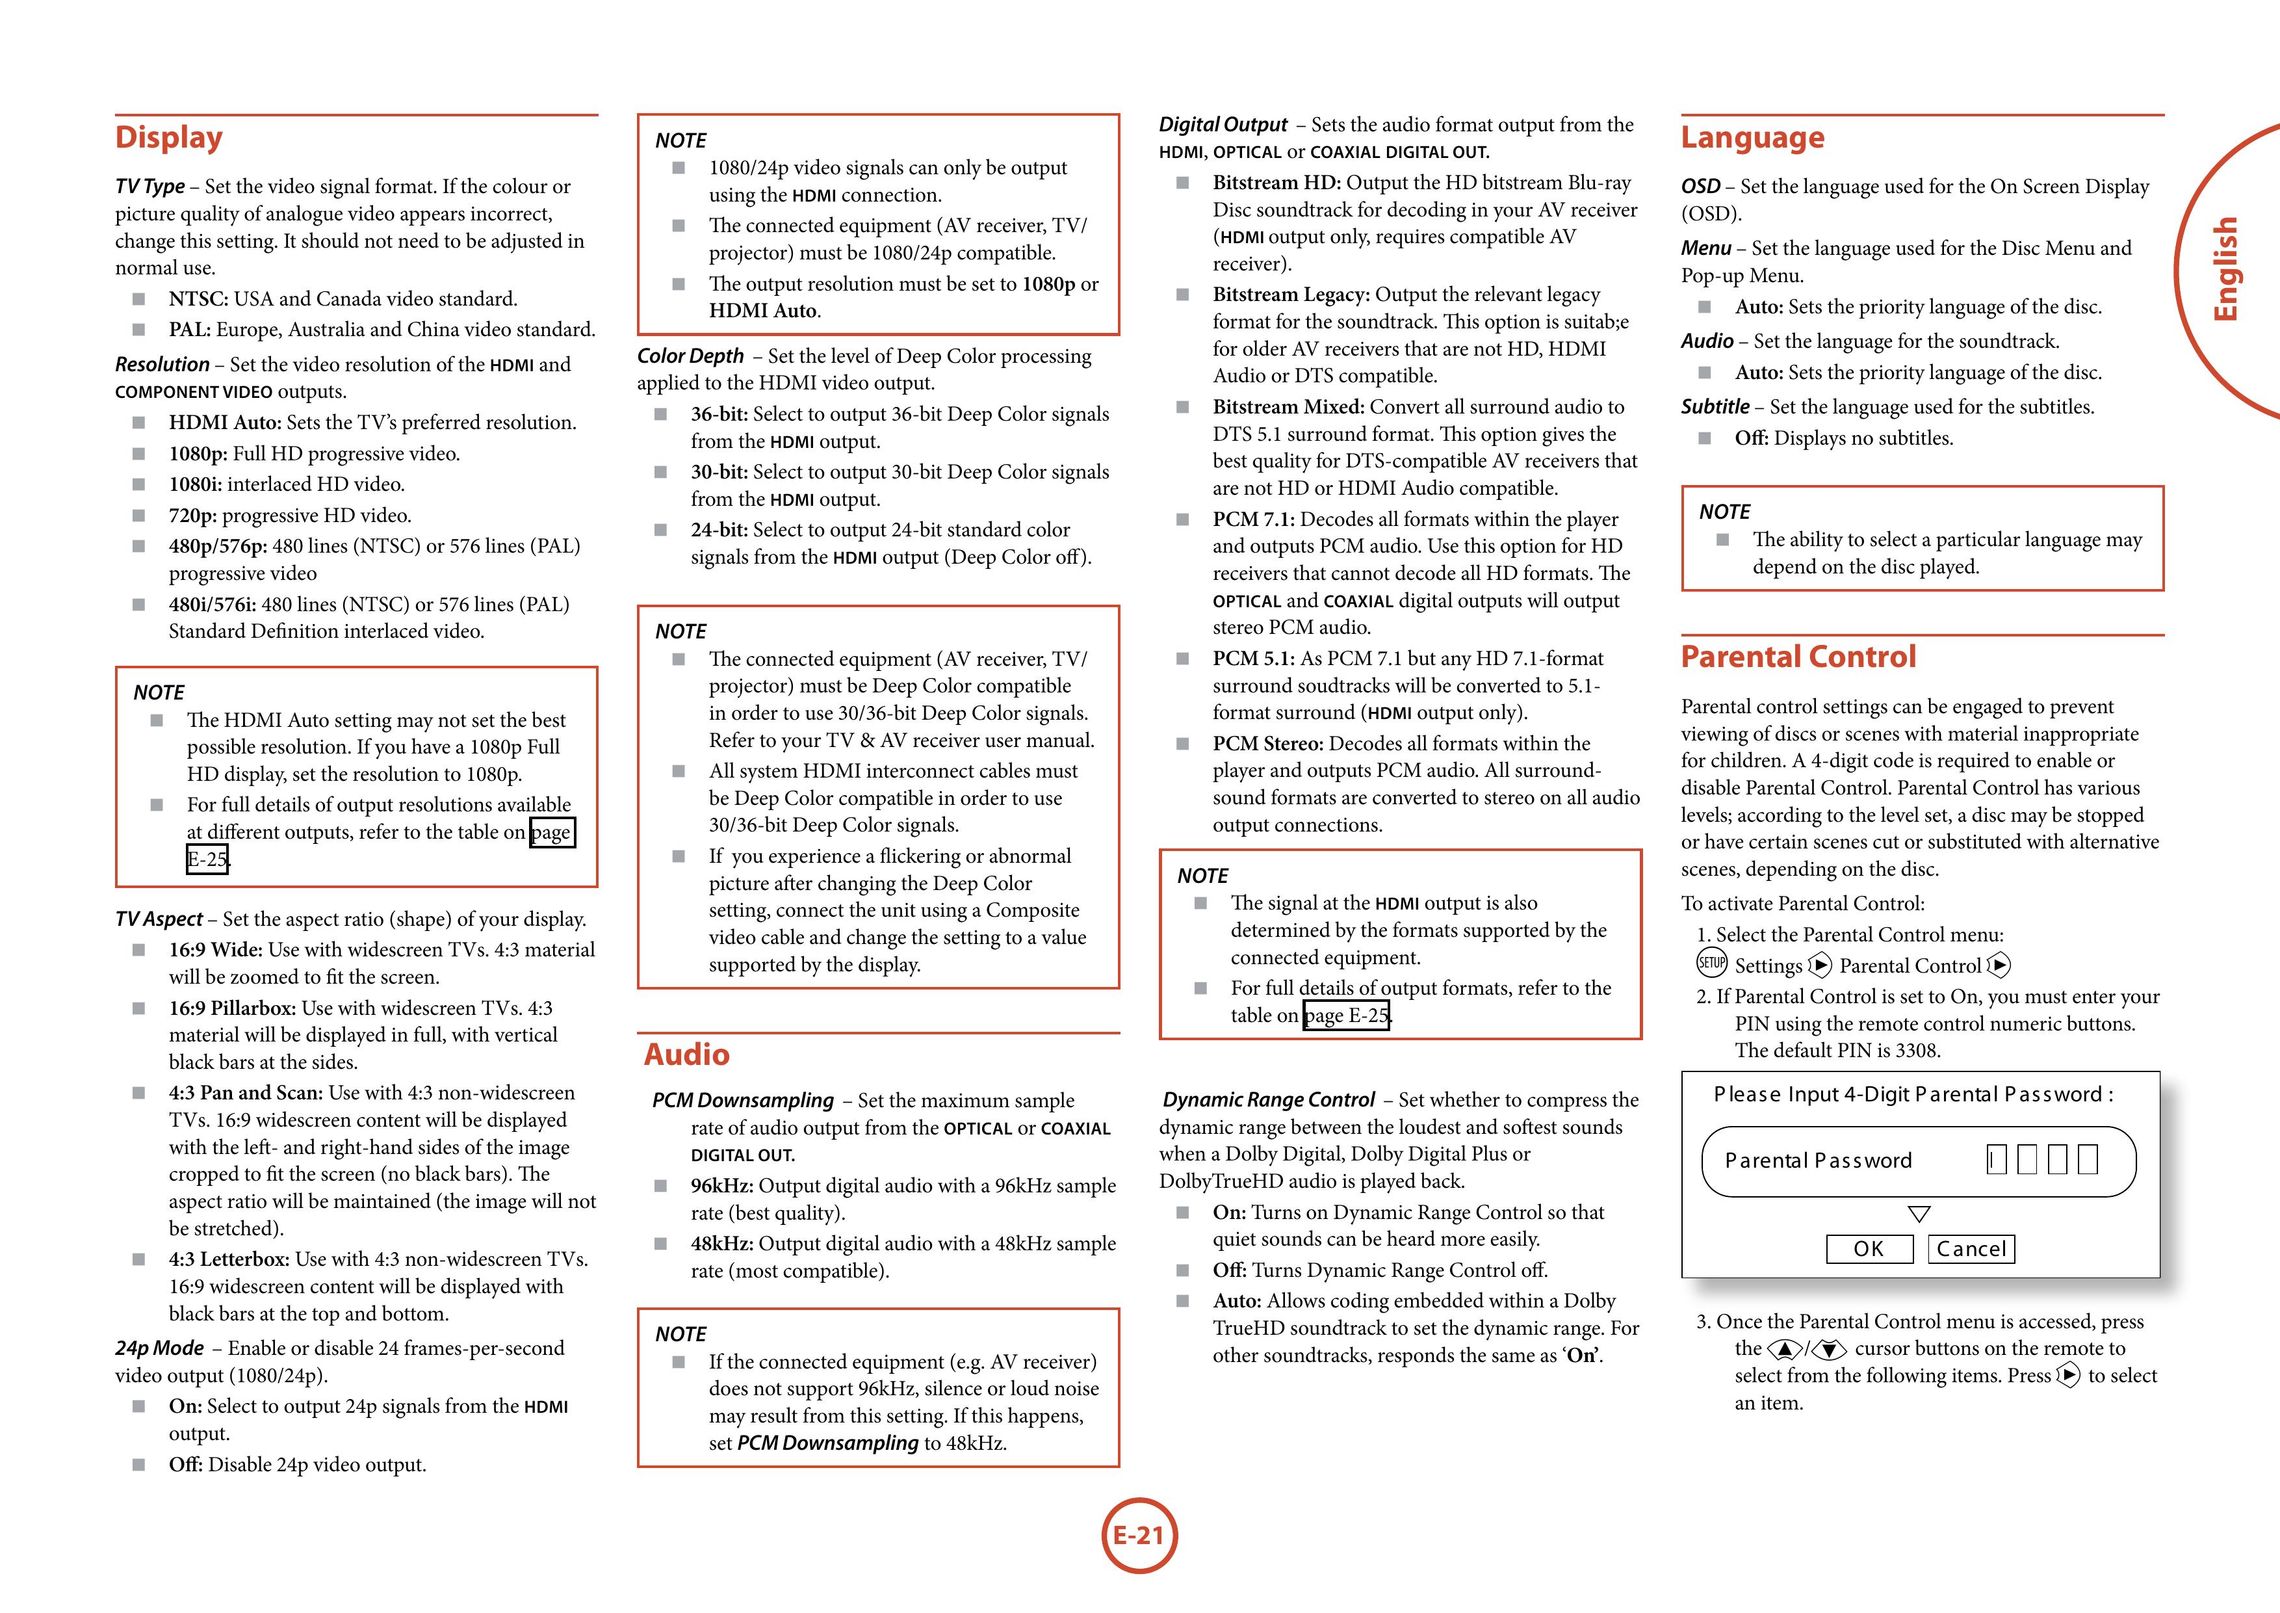 Arcam BDP100 Blu-ray Player User Manual (Page 23)